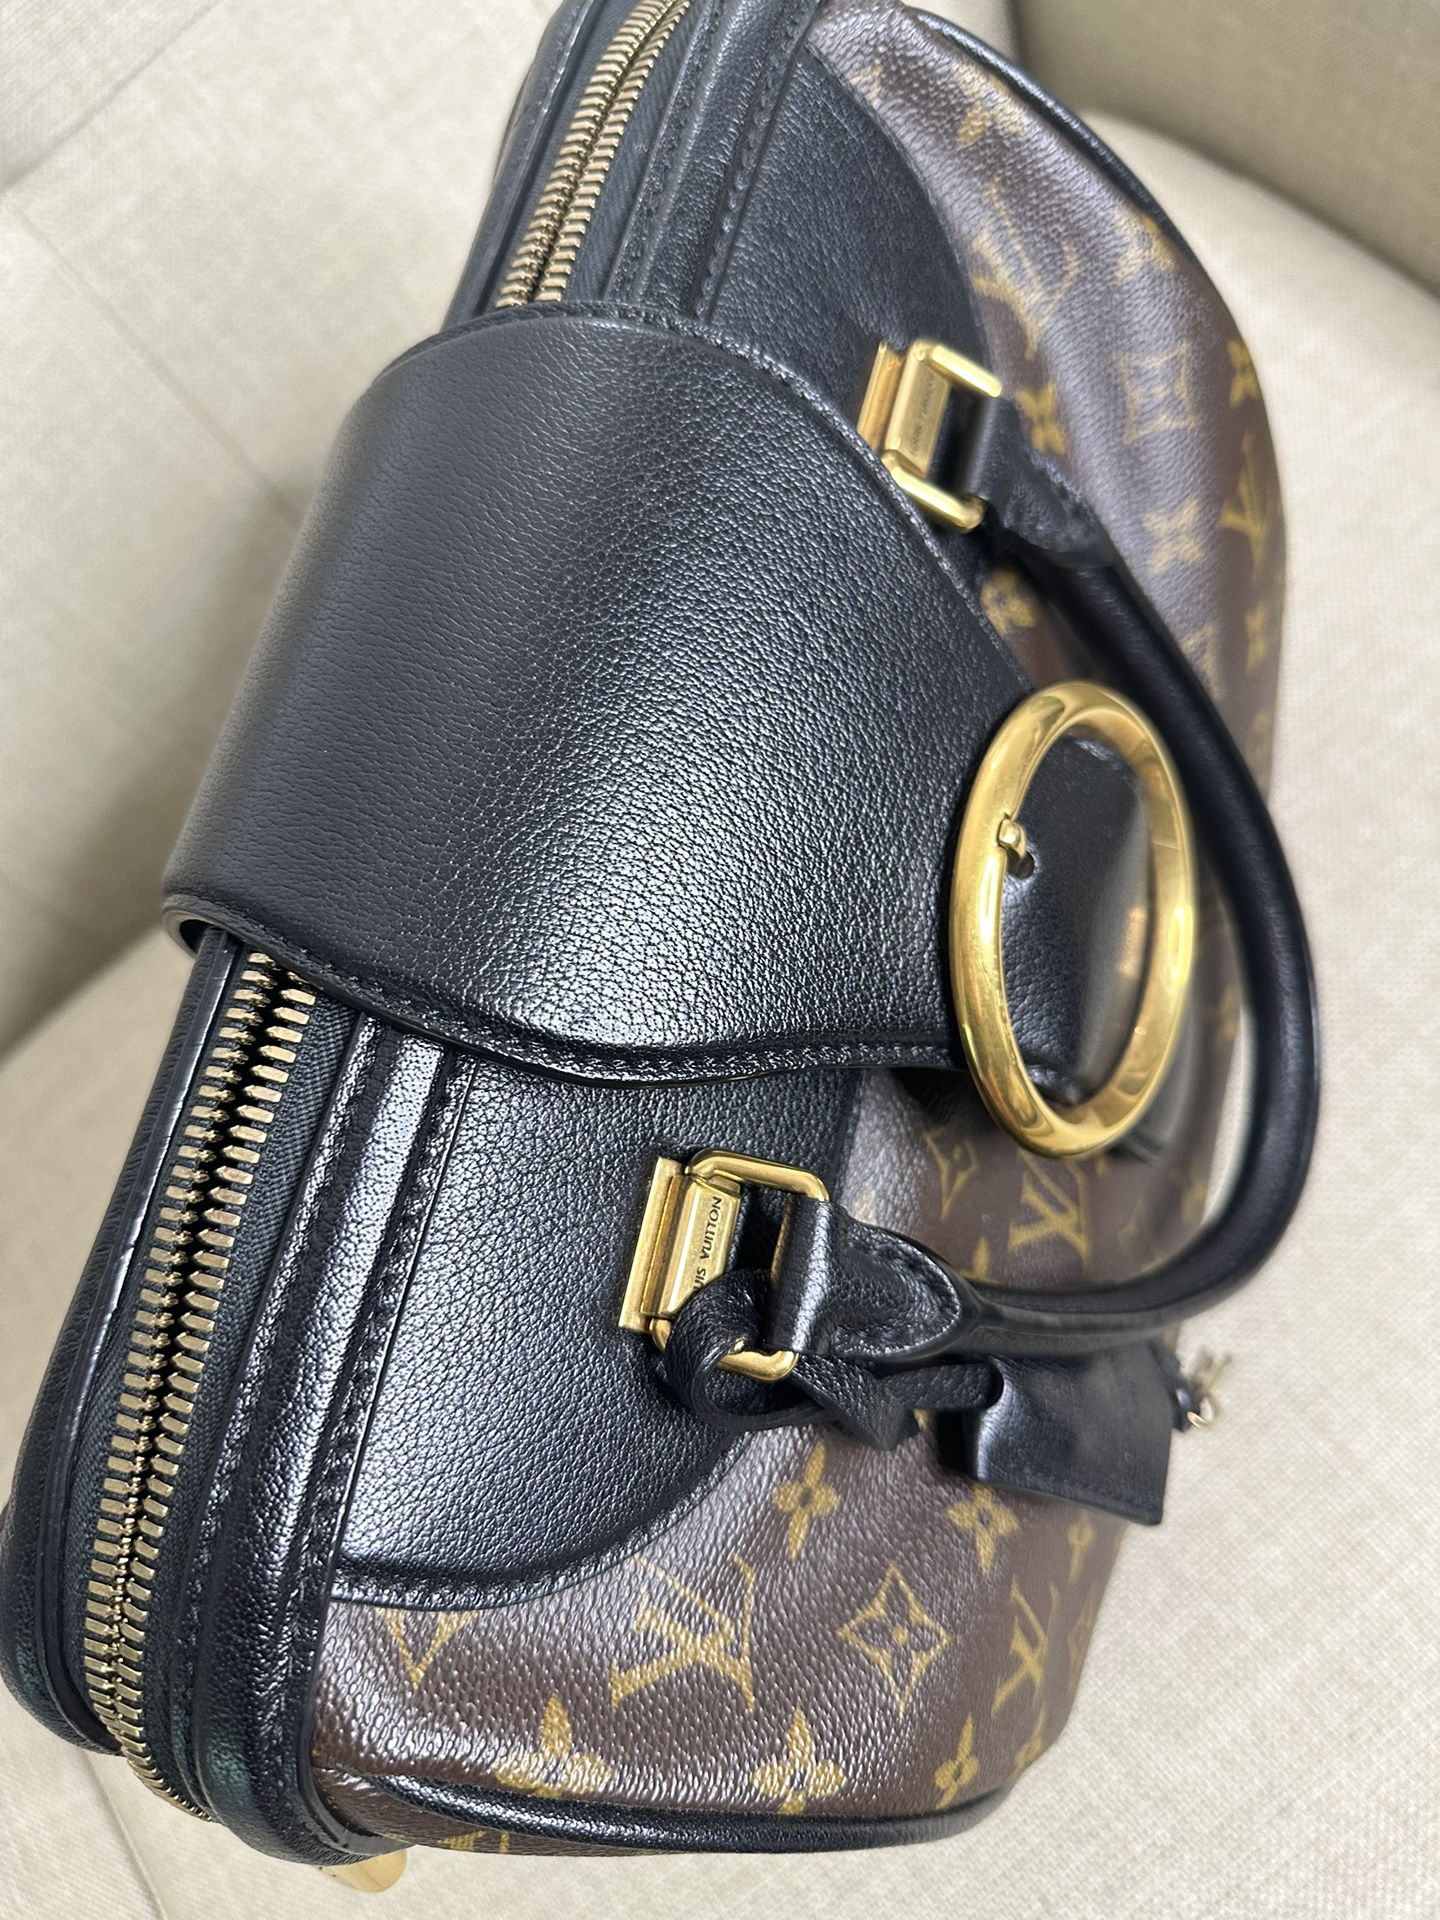 Louis Vuitton Speedy Limited Edition for Sale in No Huntingdon, PA - OfferUp